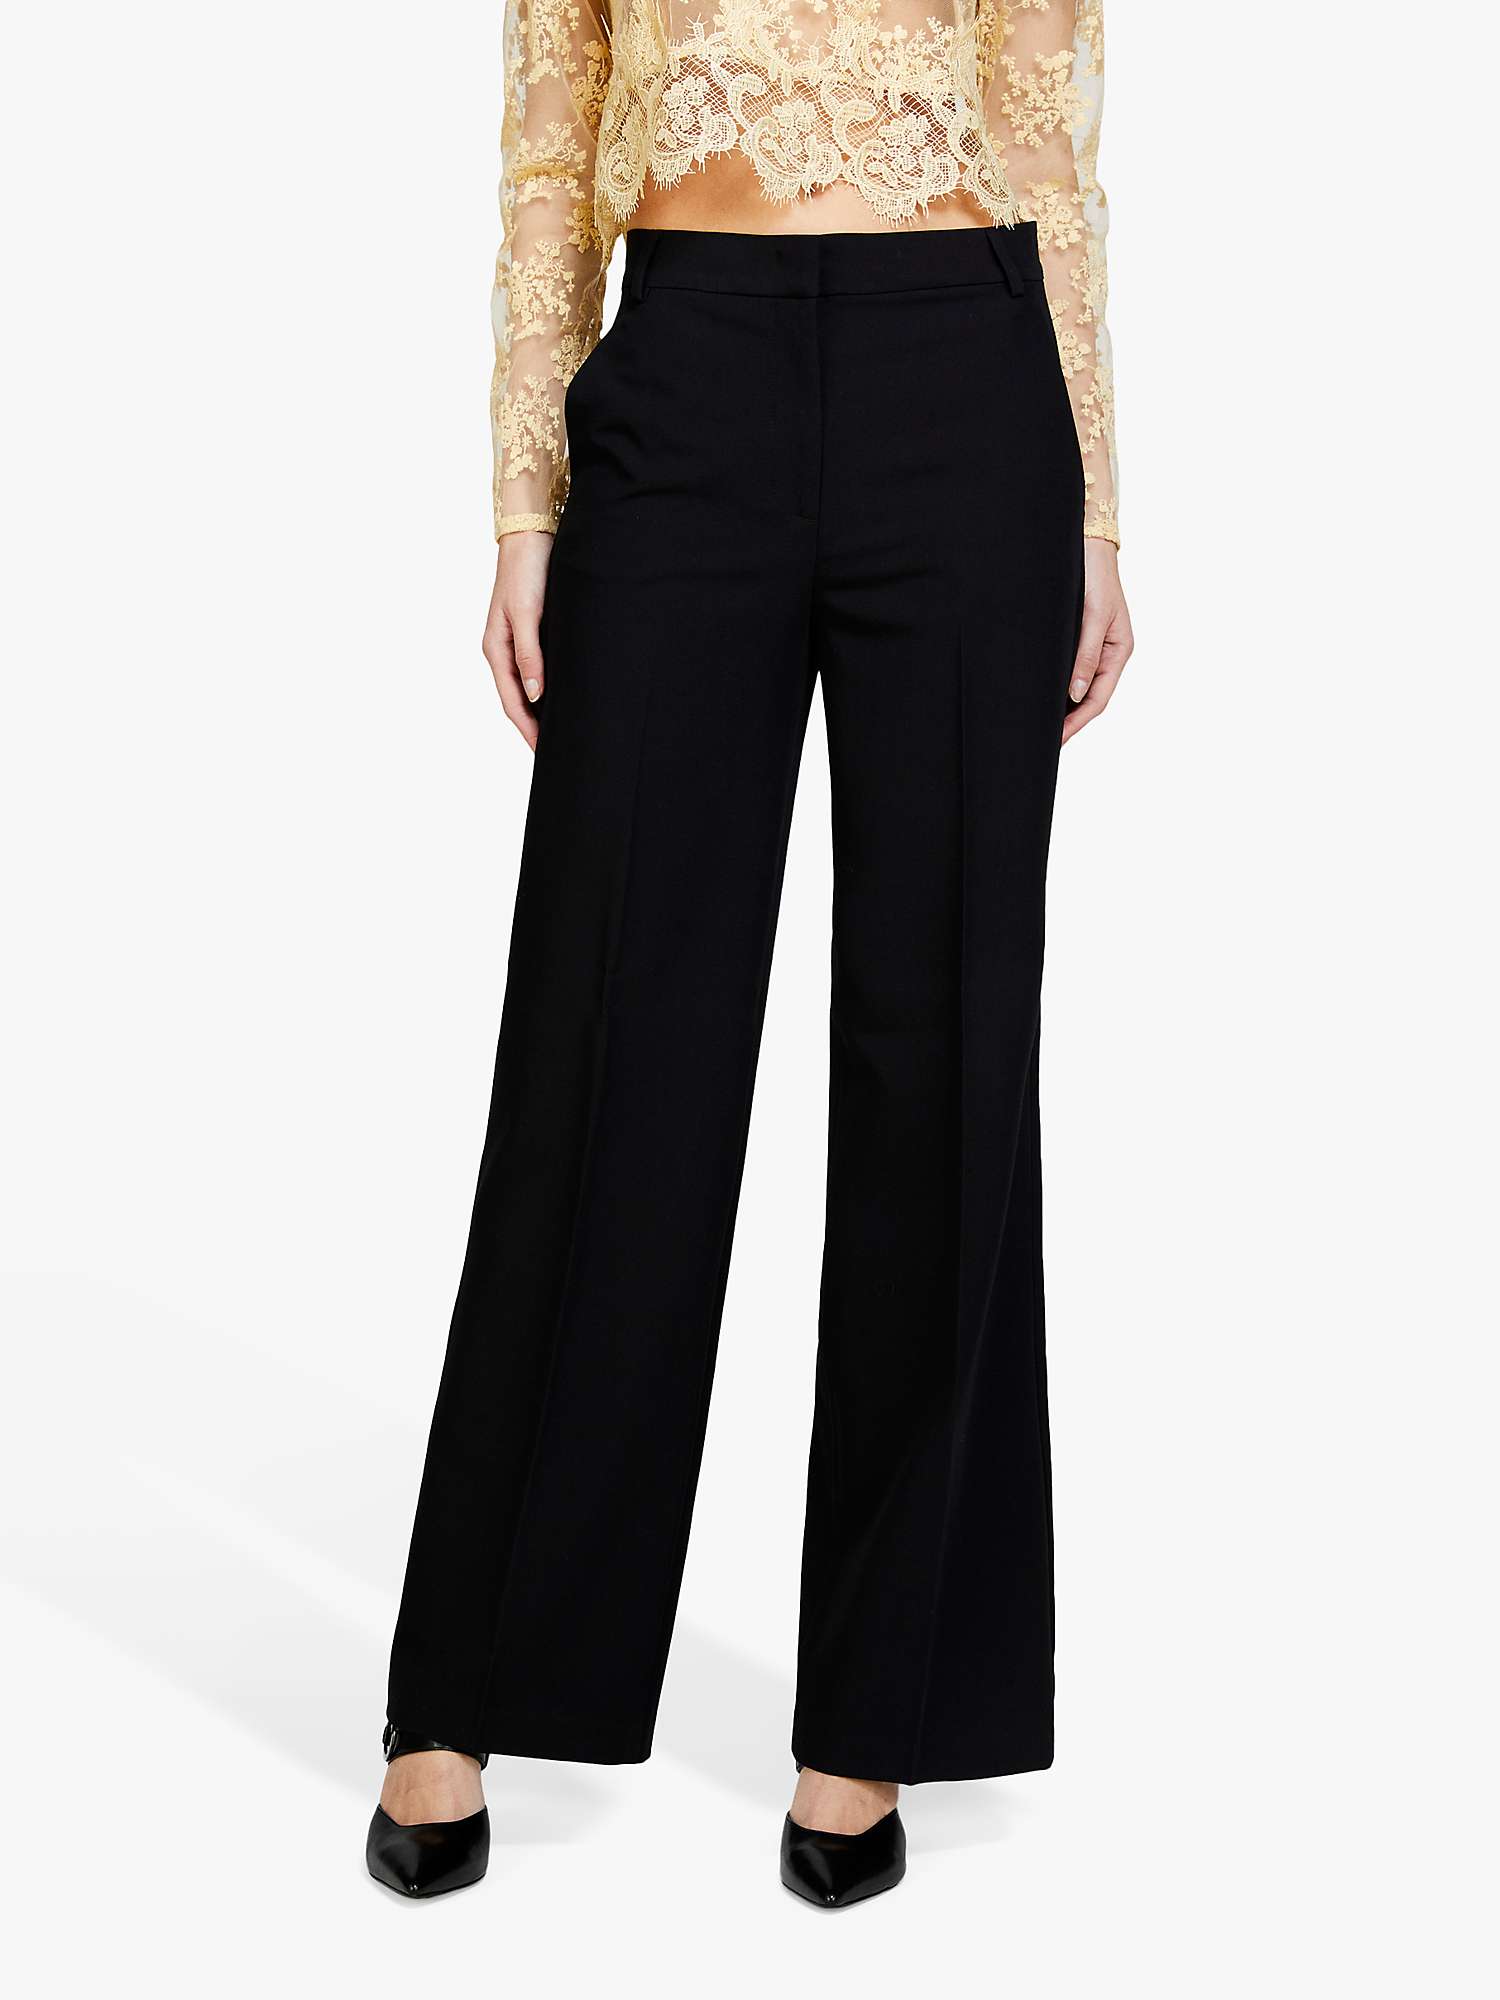 Buy SISLEY Flare Fit Stretch Trousers Online at johnlewis.com